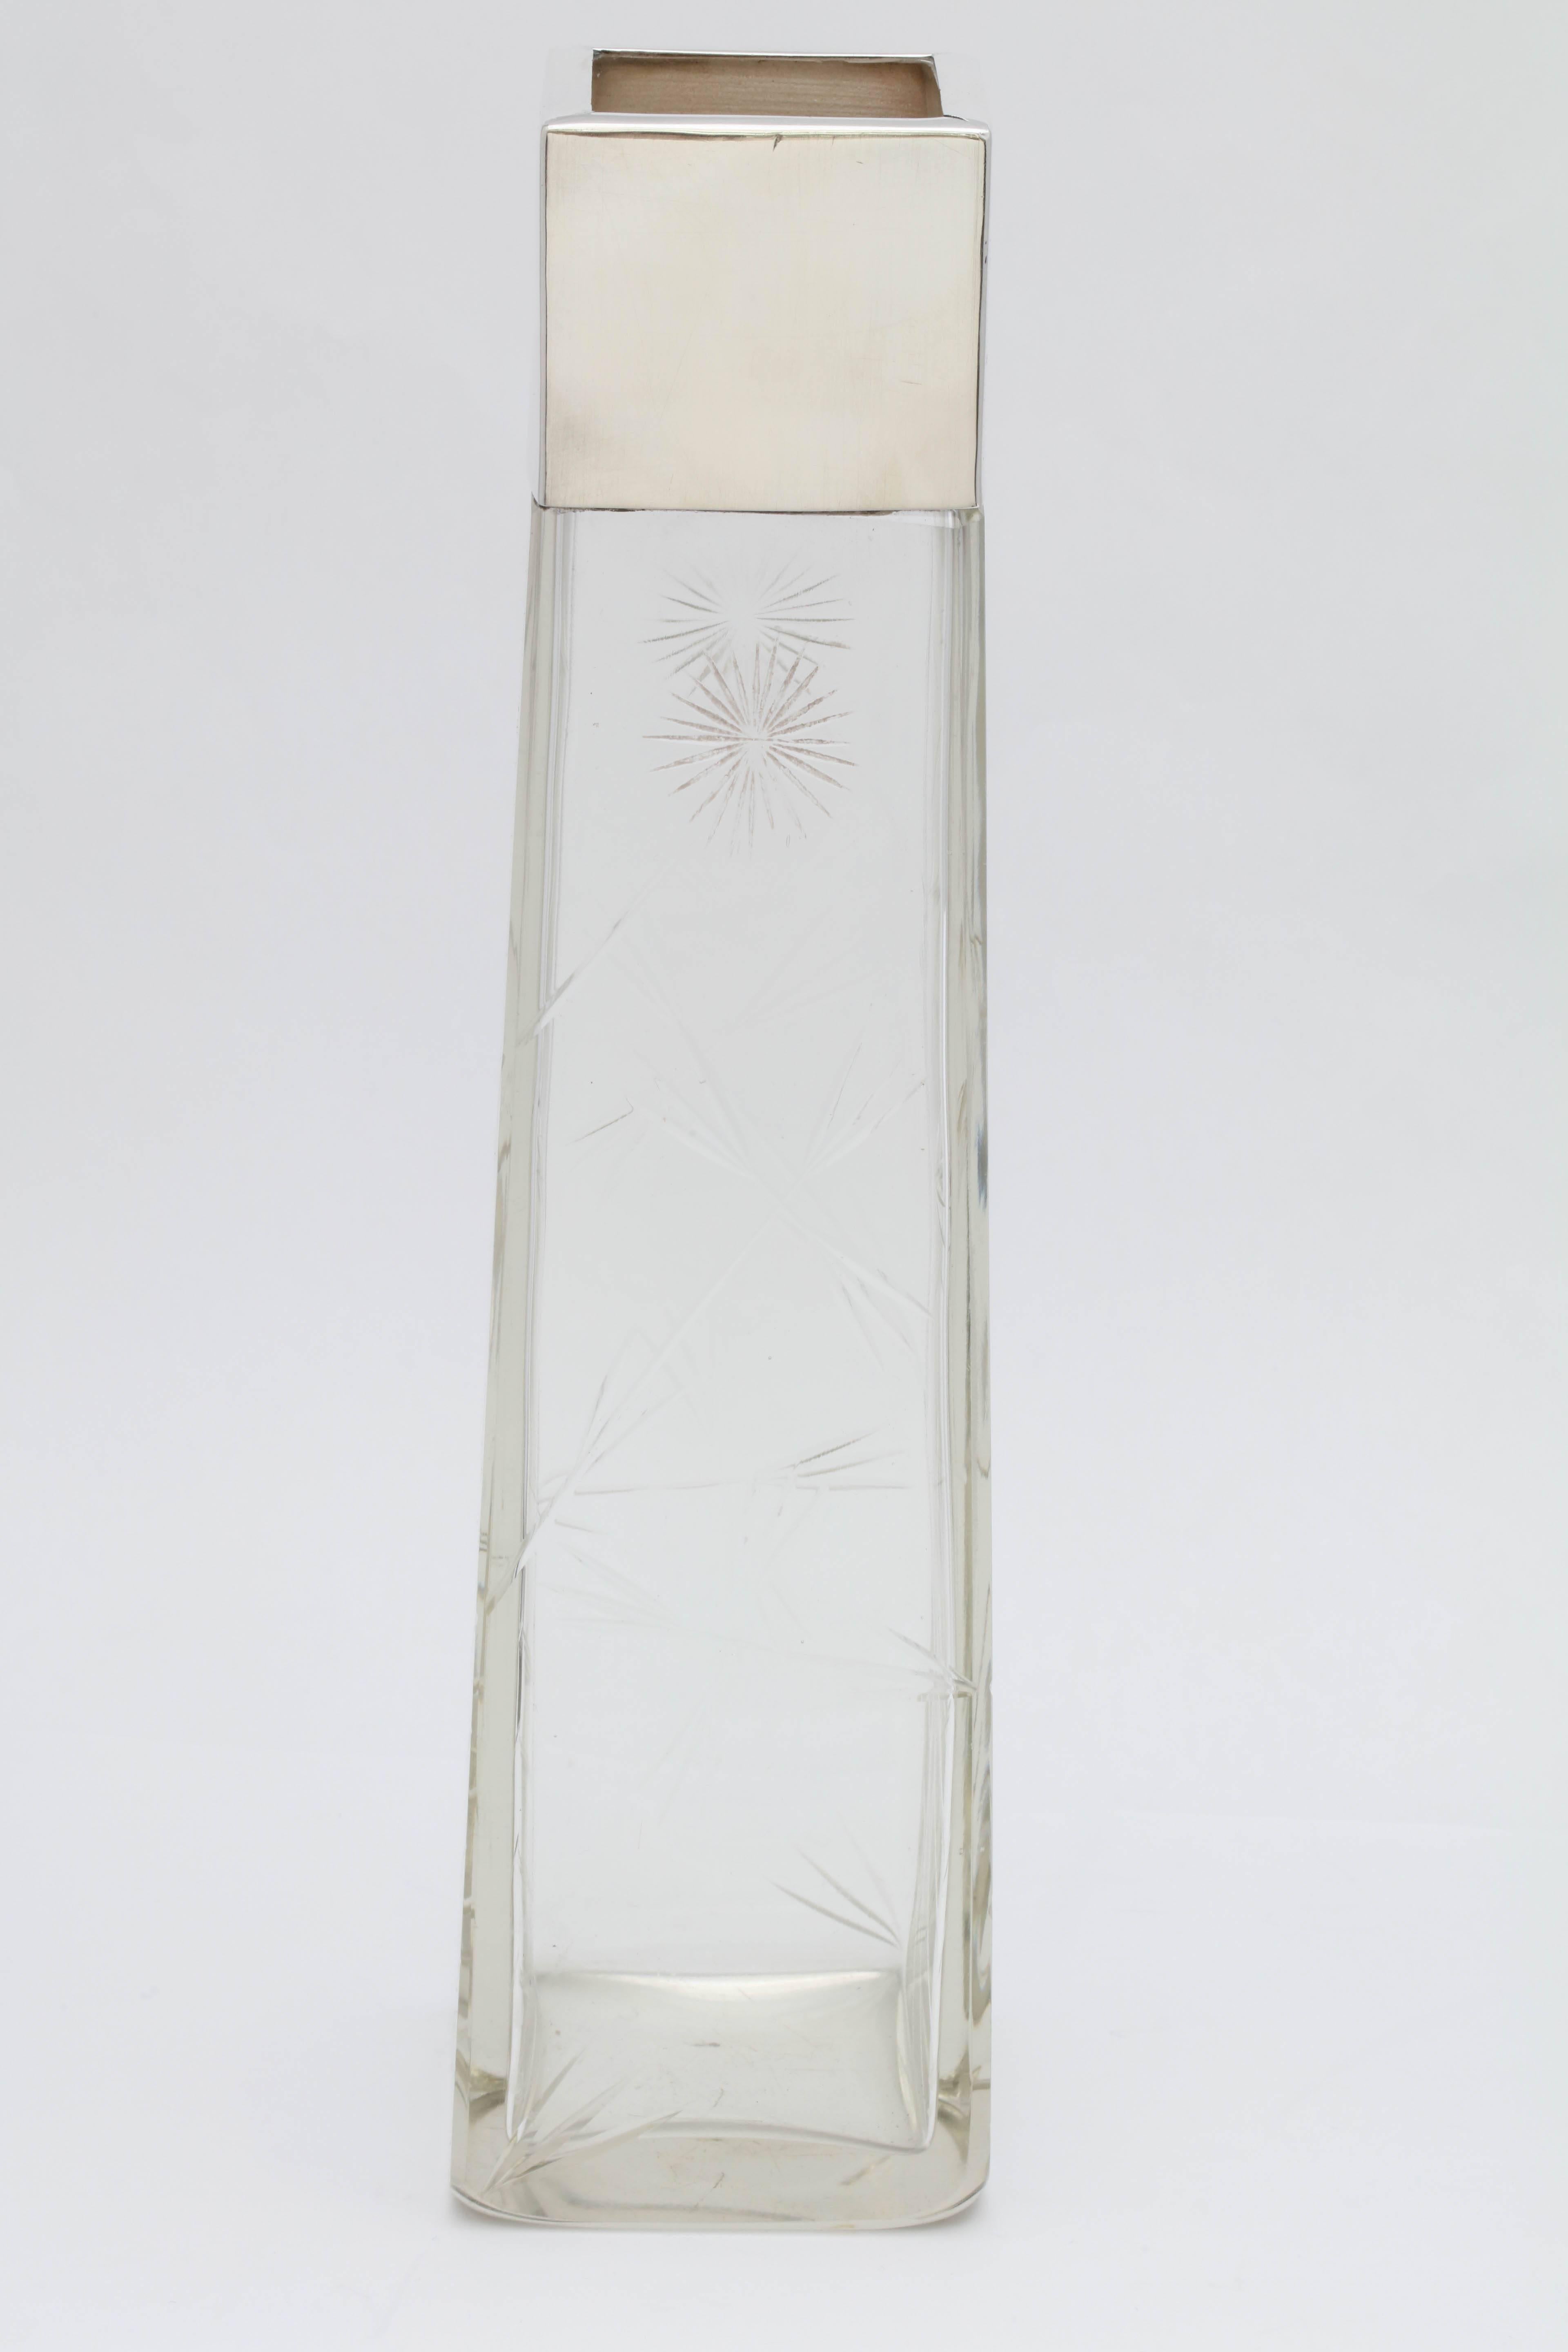 Early 20th Century Edwardian, Sterling Silver-Mounted Rectangular Japonesque Style Crystal Vase